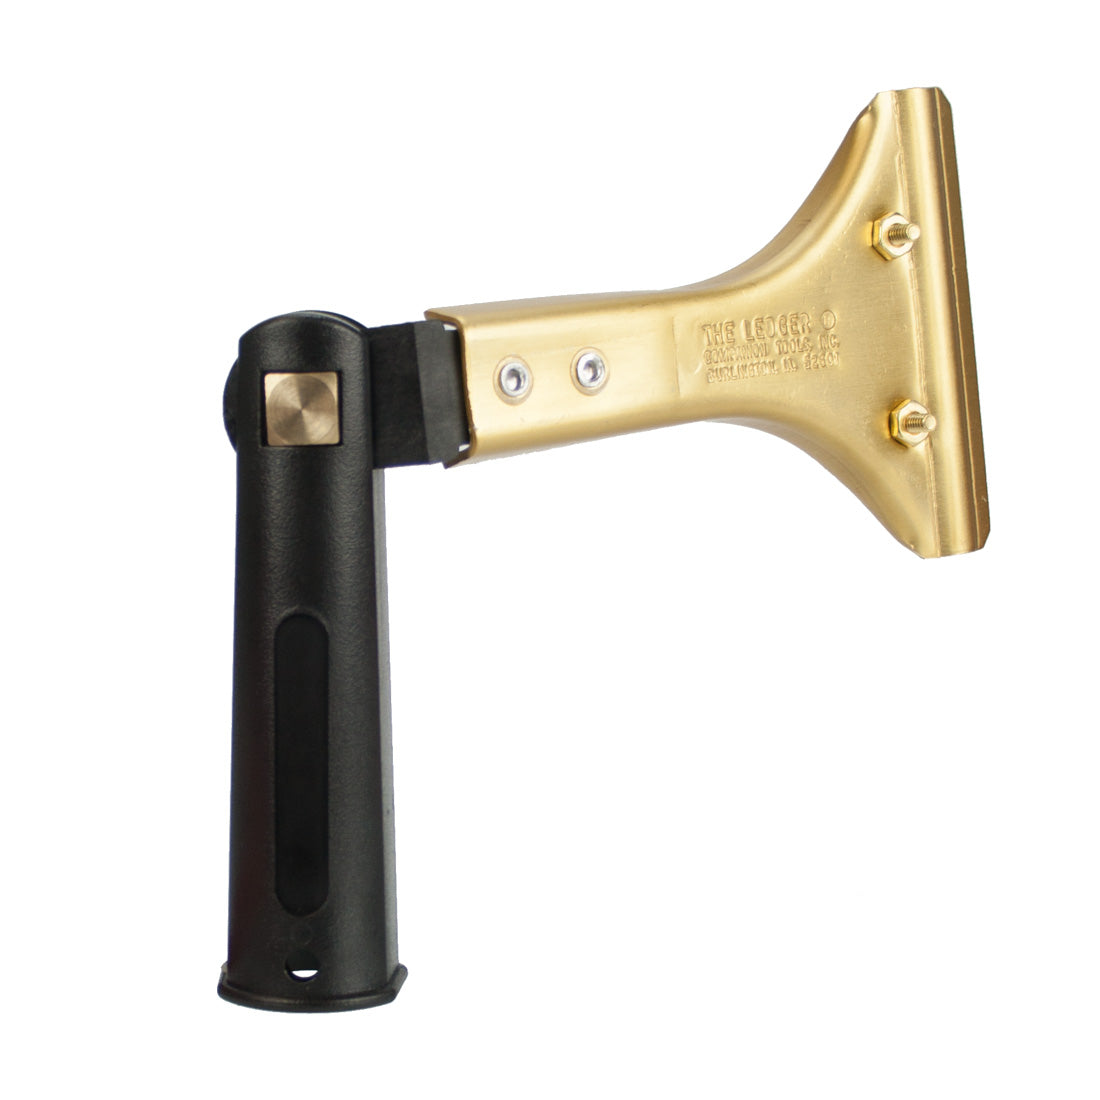 Companion Tools Ledger Squeegee Handles Swivel Angled View